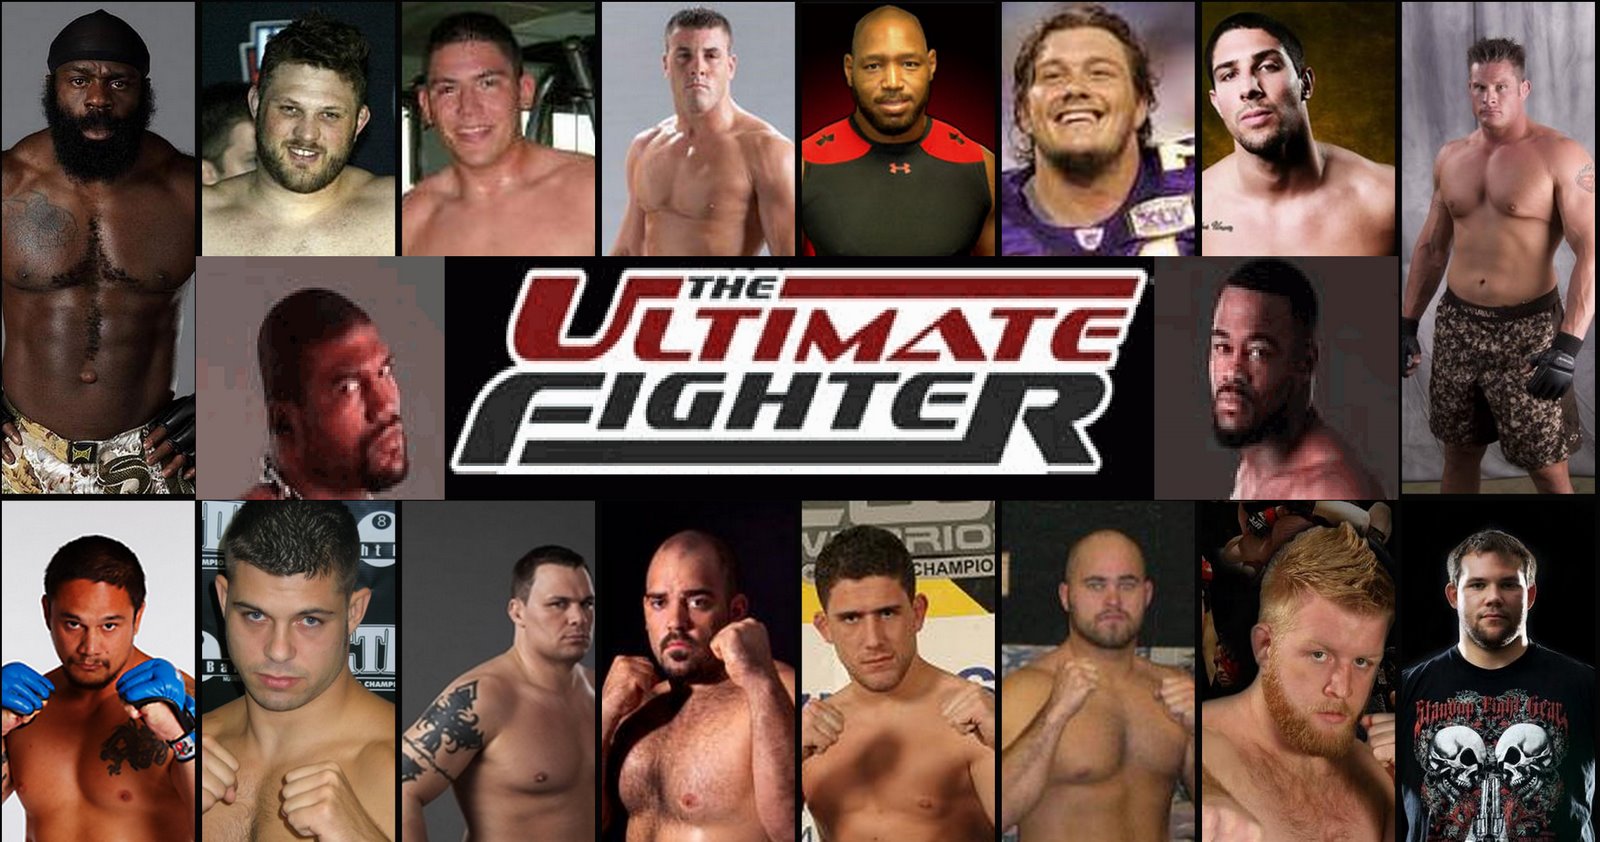 Names the Top 25 List of "The Ultimate Fighter" Contestents